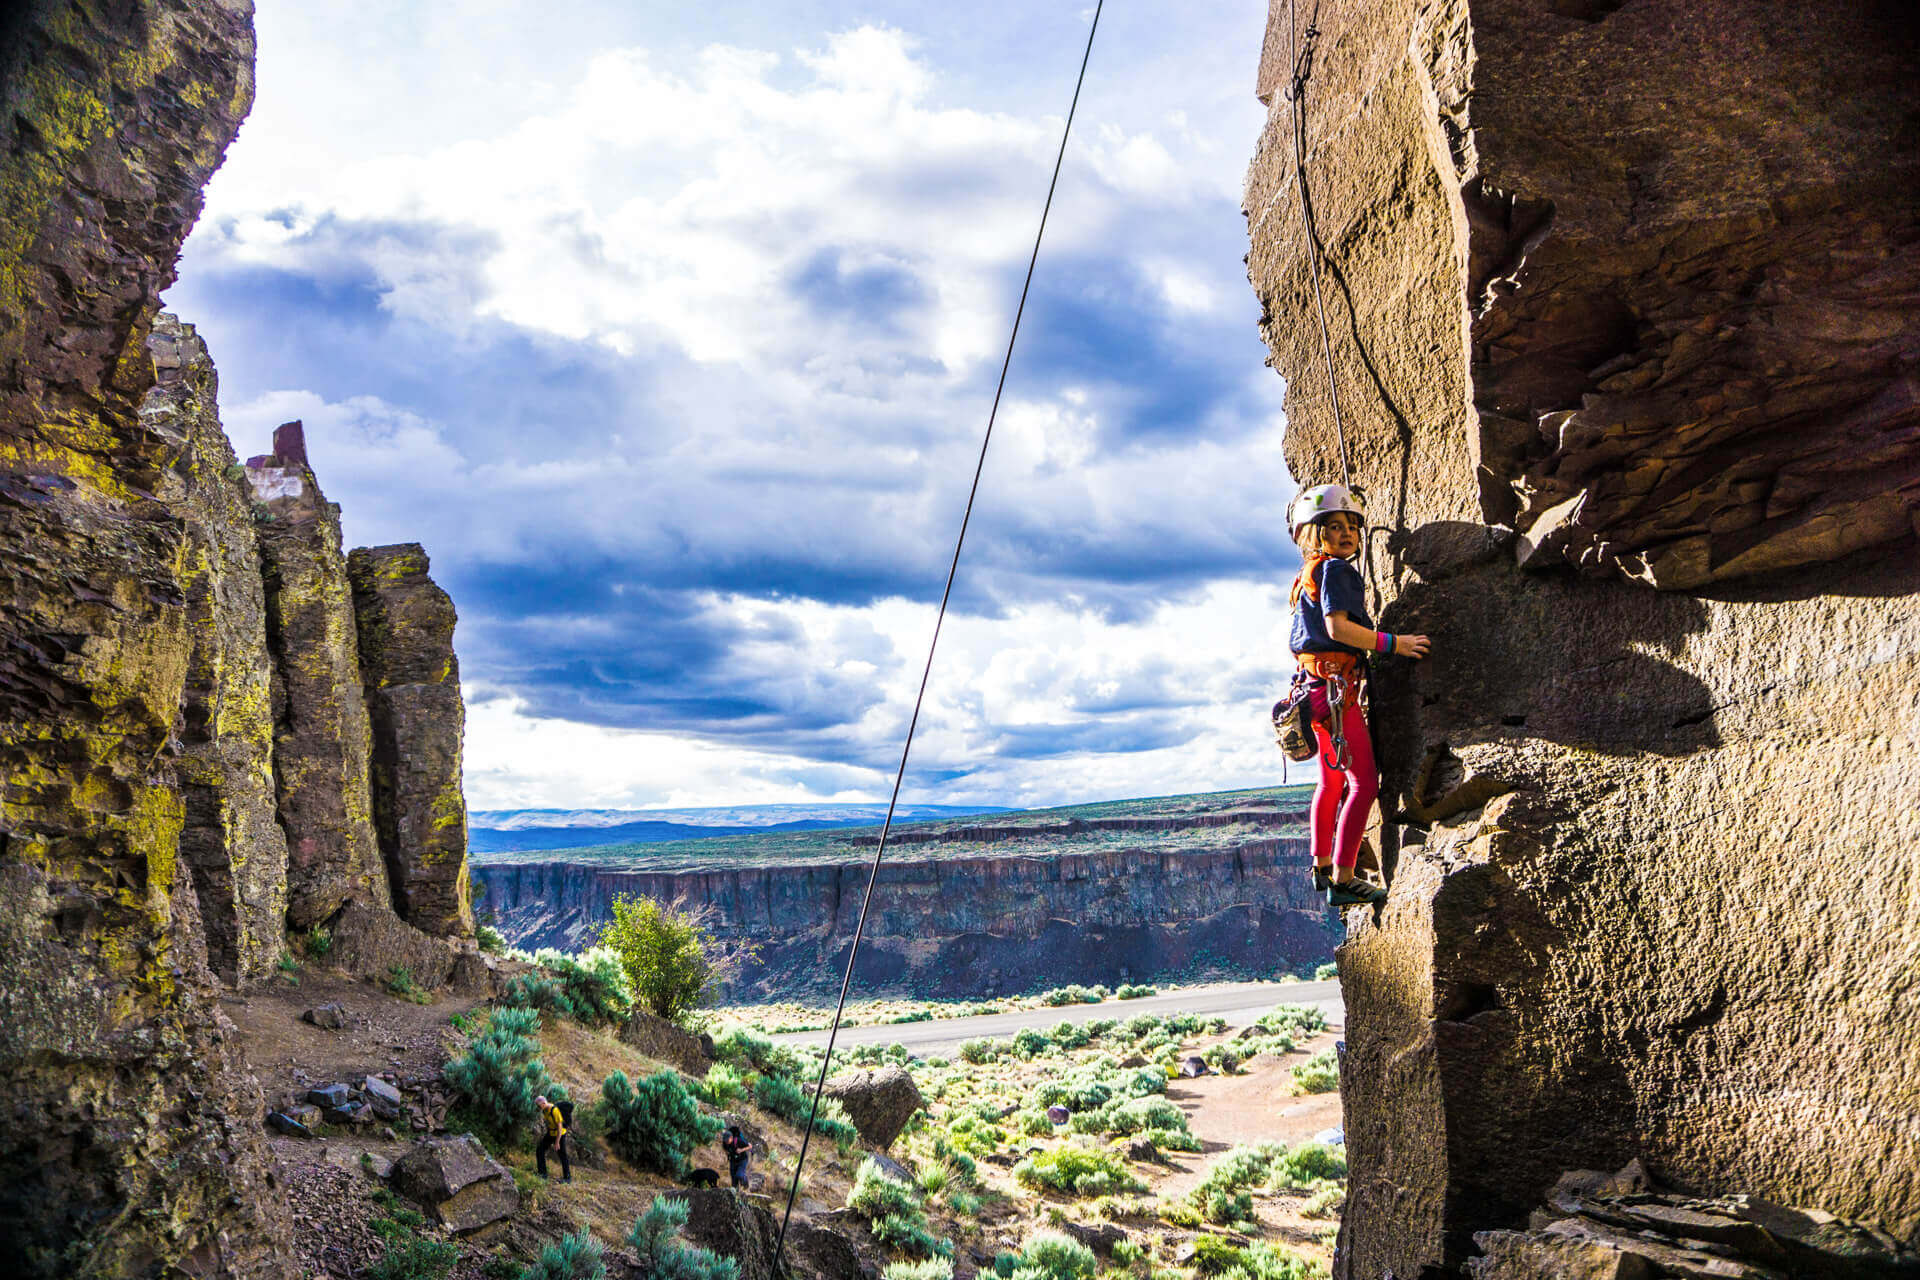 A young girl wearing a helmet and gear perches on a ledge while rock climbing in Washington.